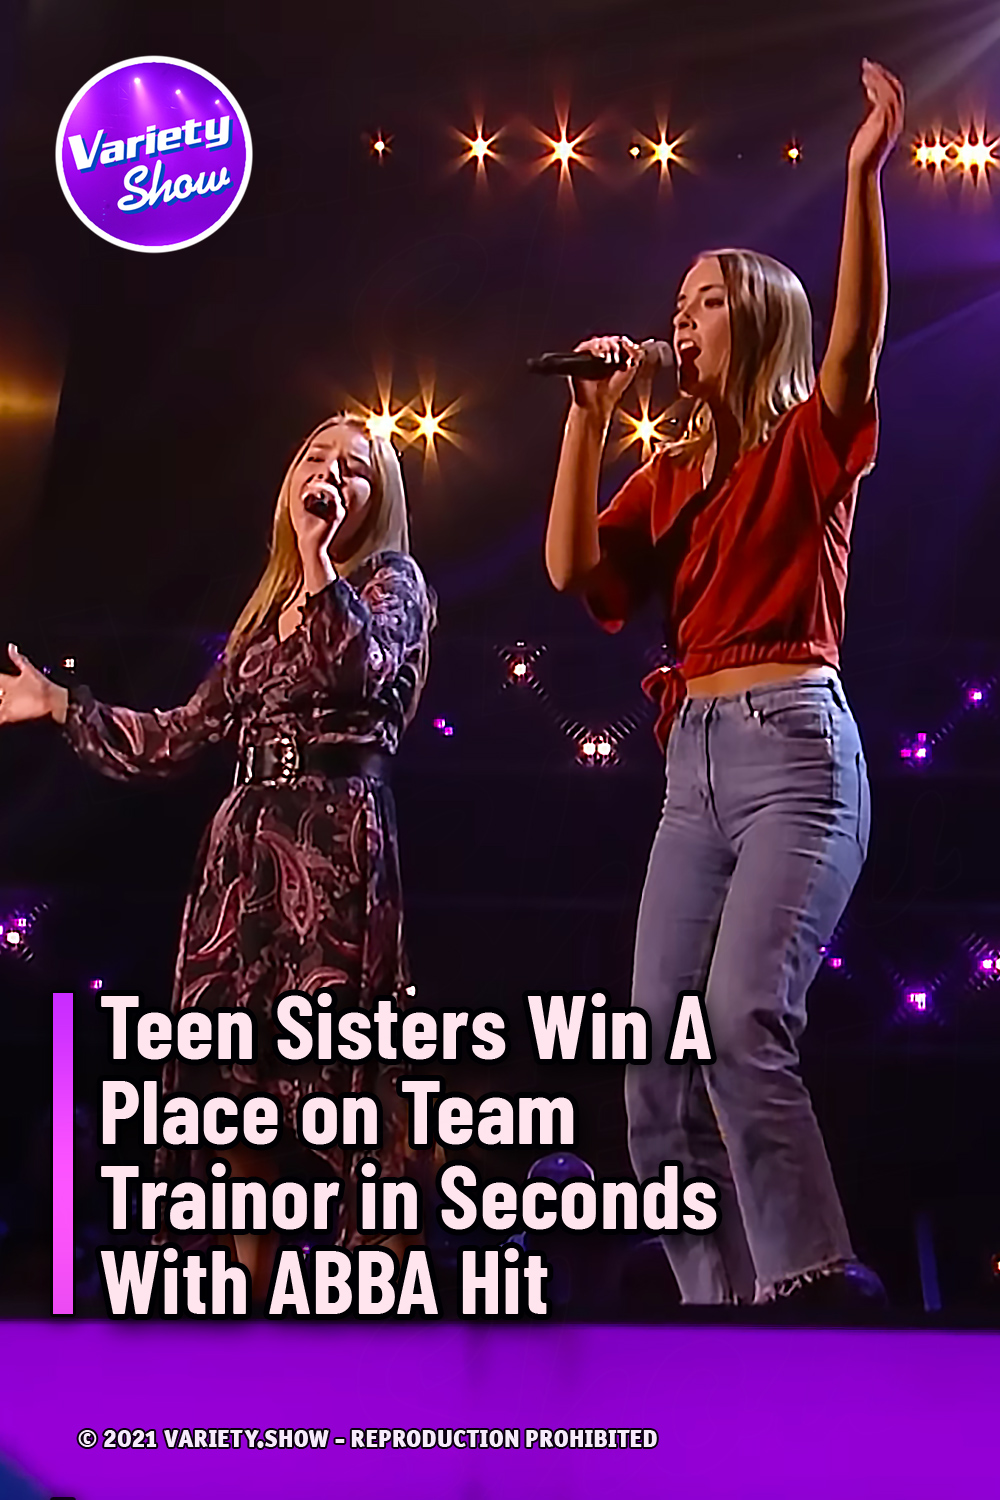 Teen Sisters Win A Place on Team Trainor in Seconds With ABBA Hit